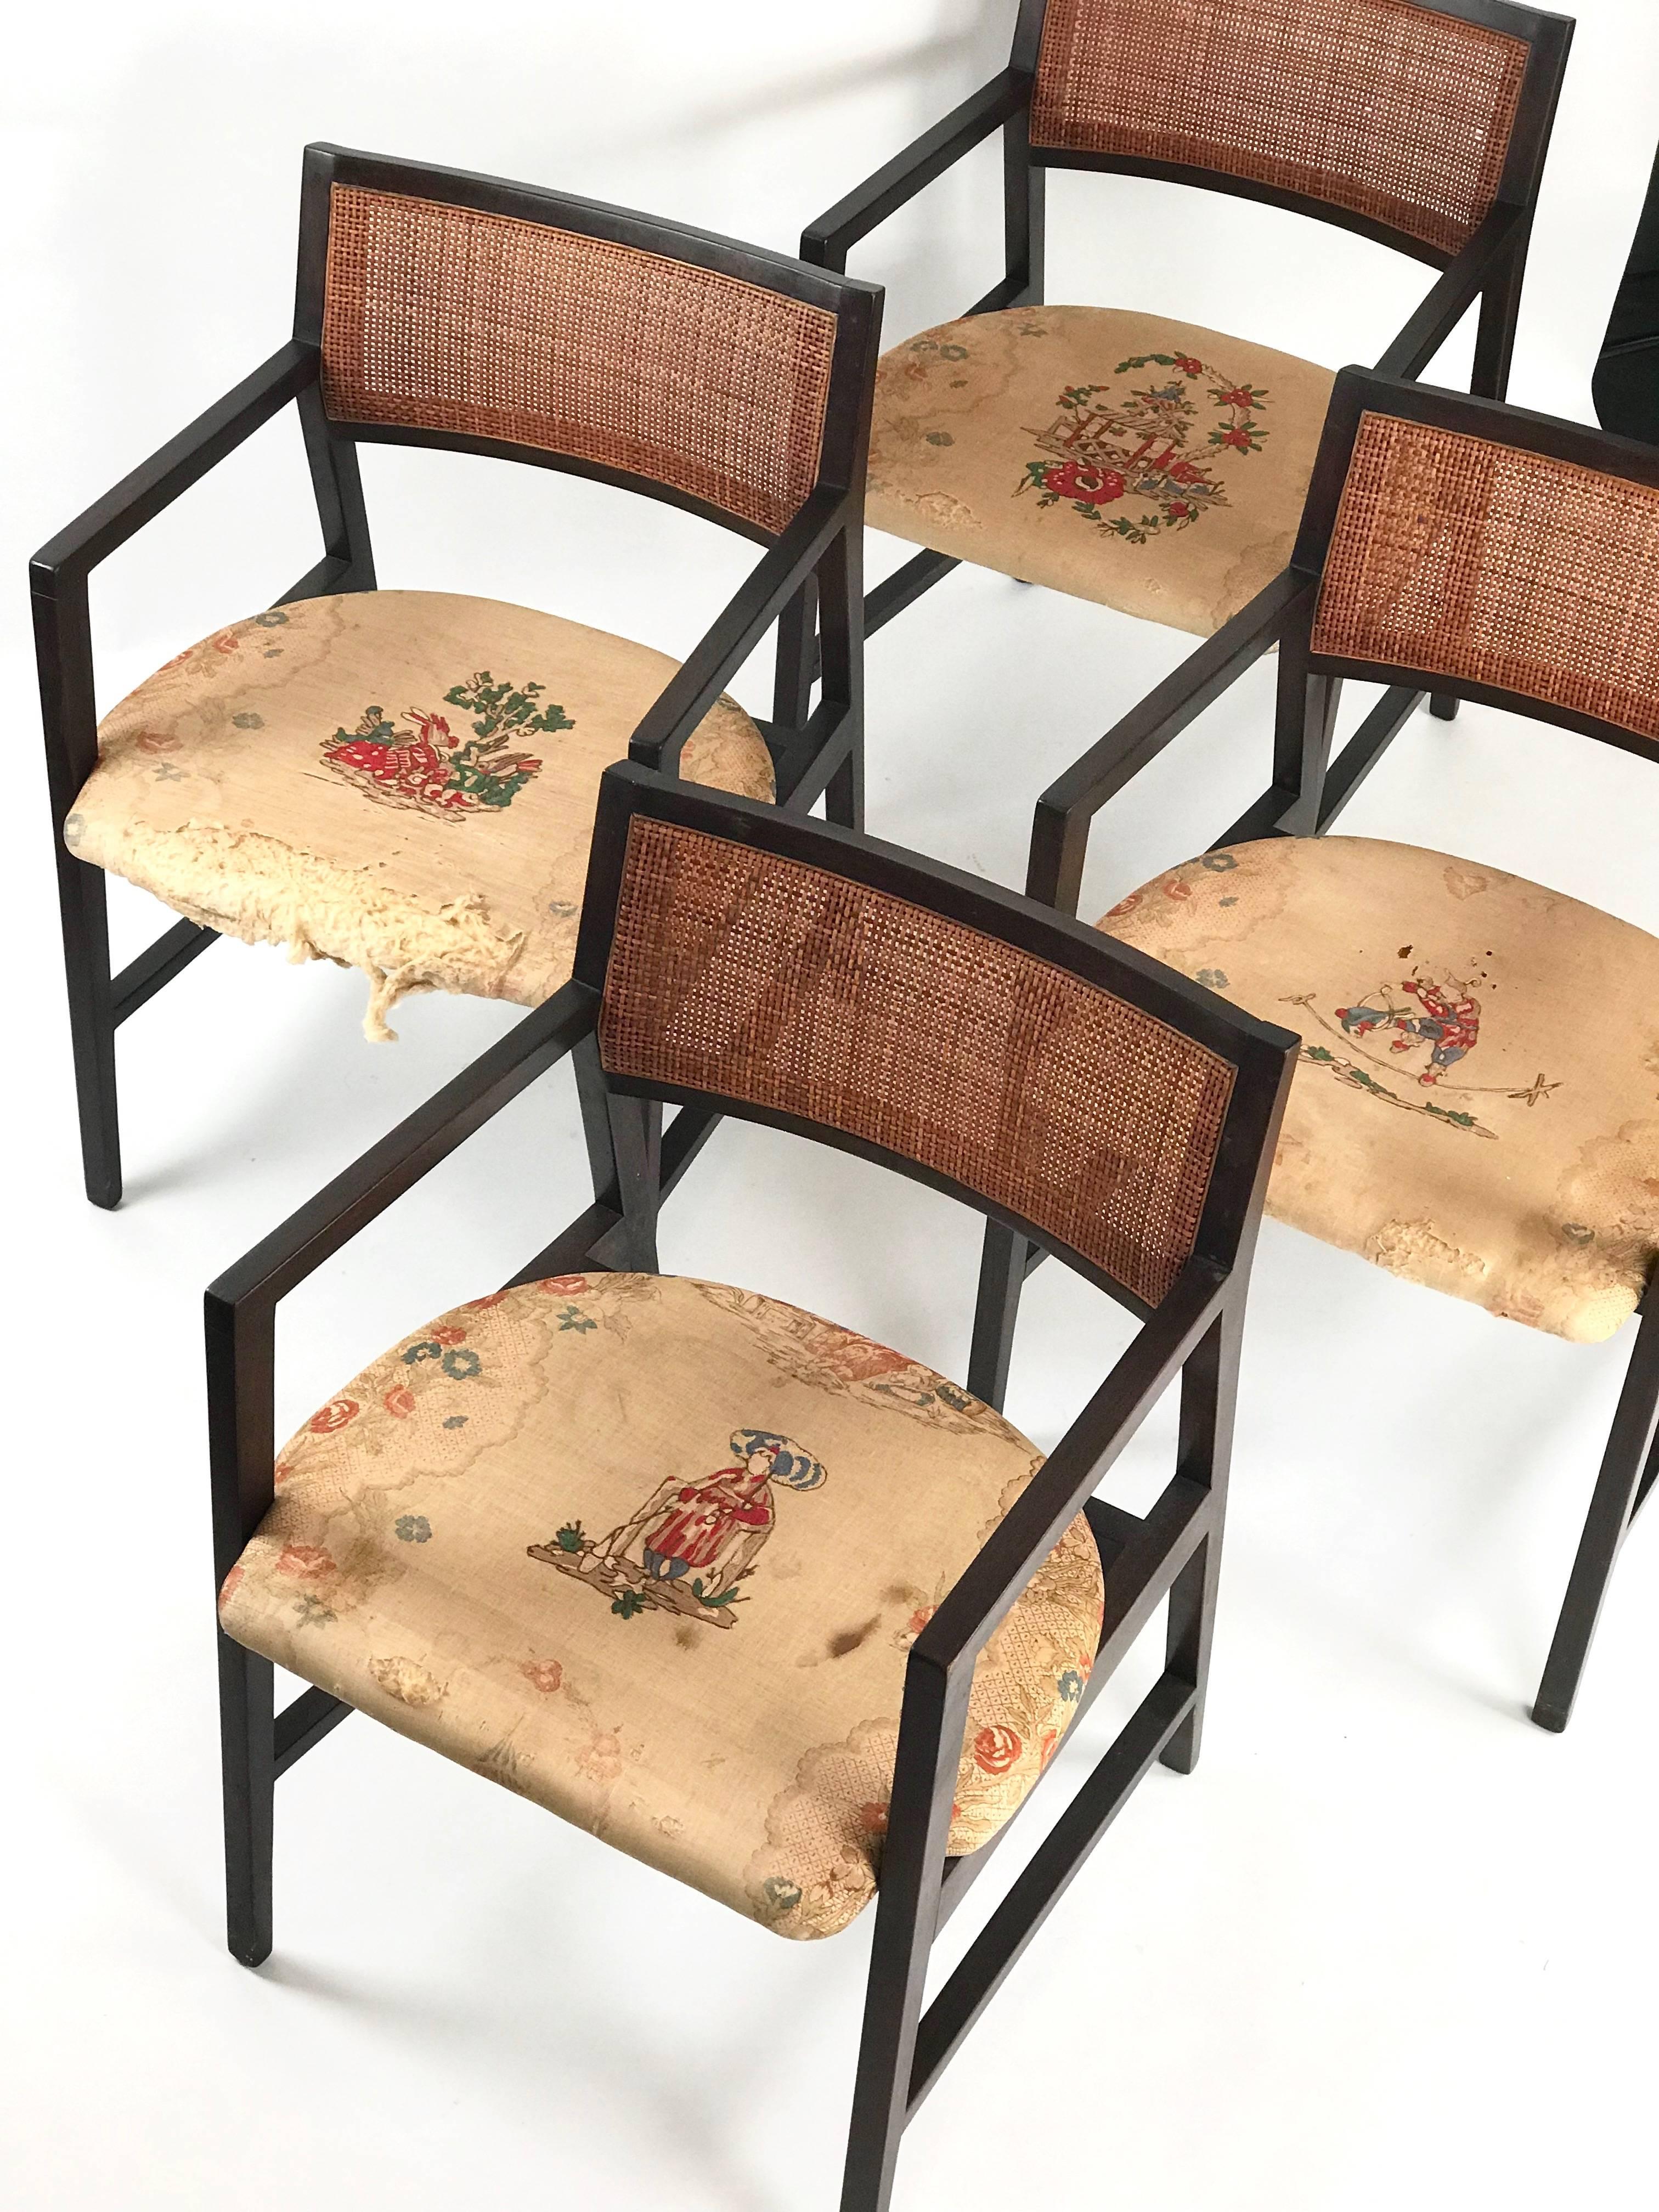 This a exceptional set of eight Edward Wormley for Dunbar model #431 chairs in overall fine vintage condition. The caning is in almost perfect condition as is the wood, which is stained dark walnut. The seats need new upholstery but the vintage